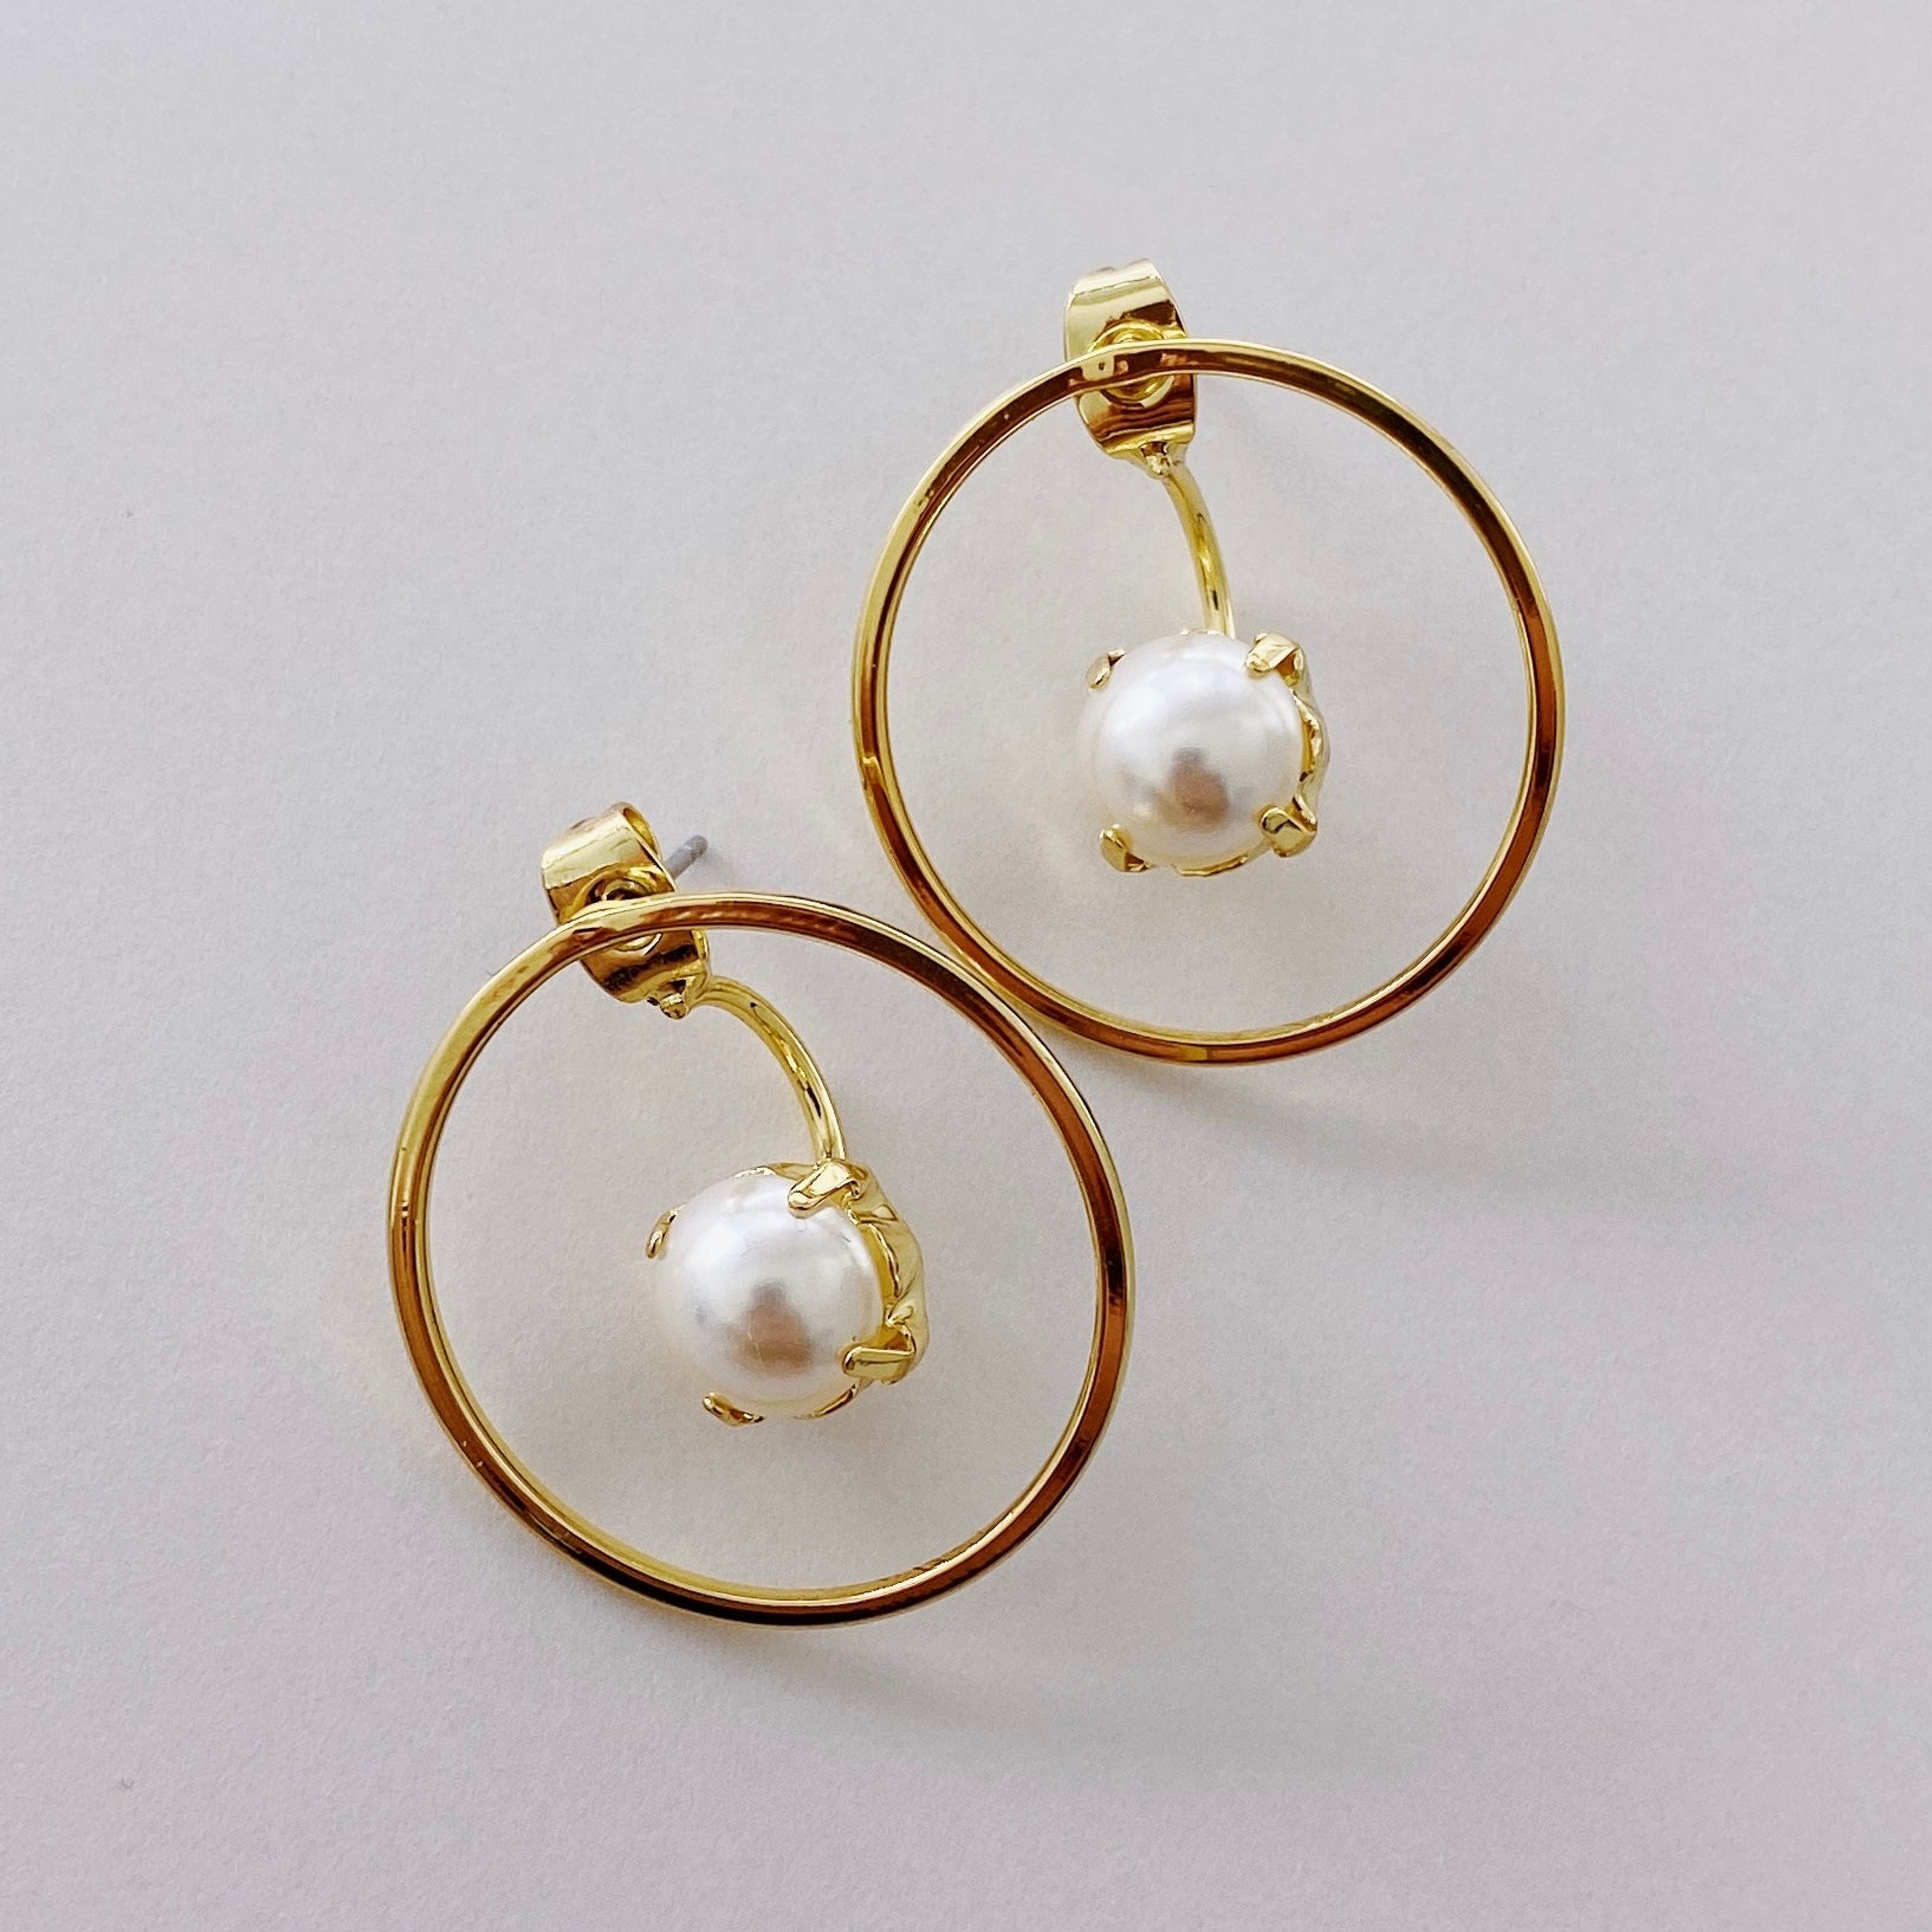 The Trapeze Earring